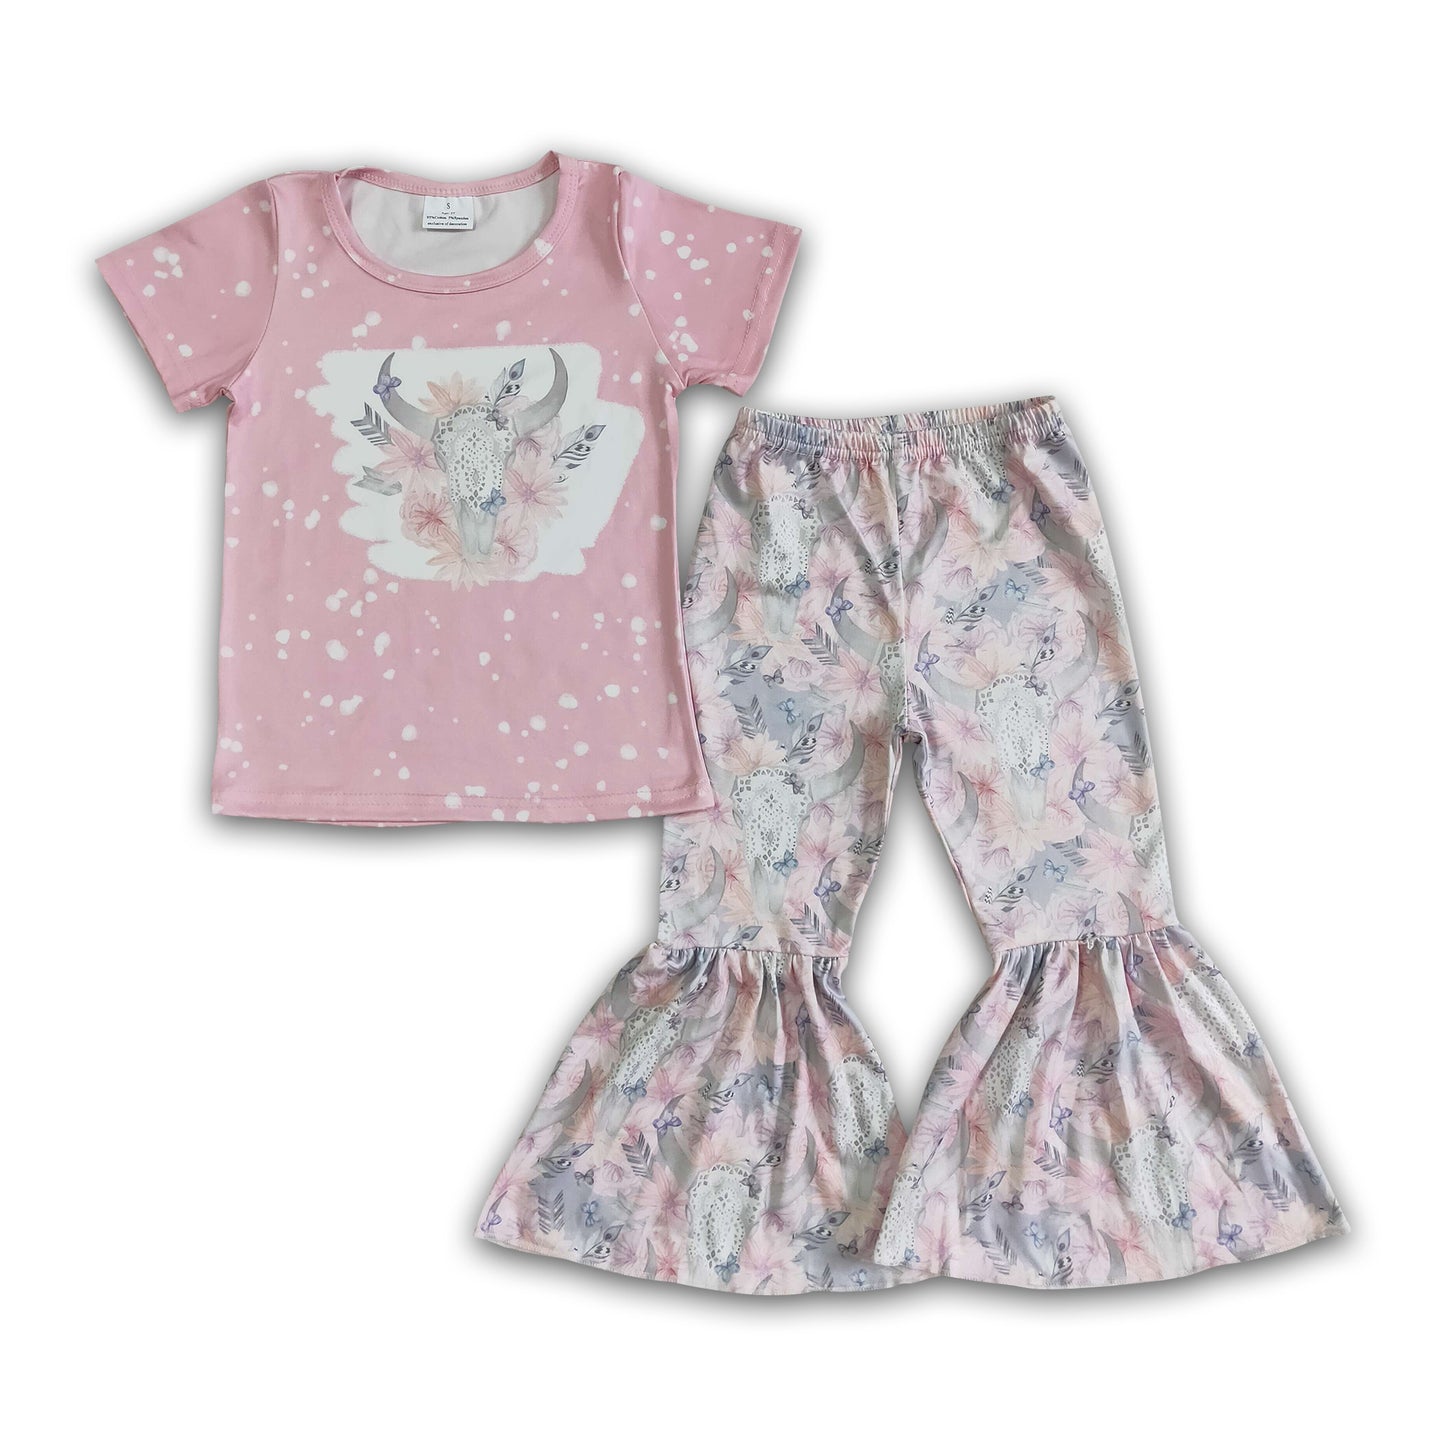 Floral bull skull kids girls pants outfits